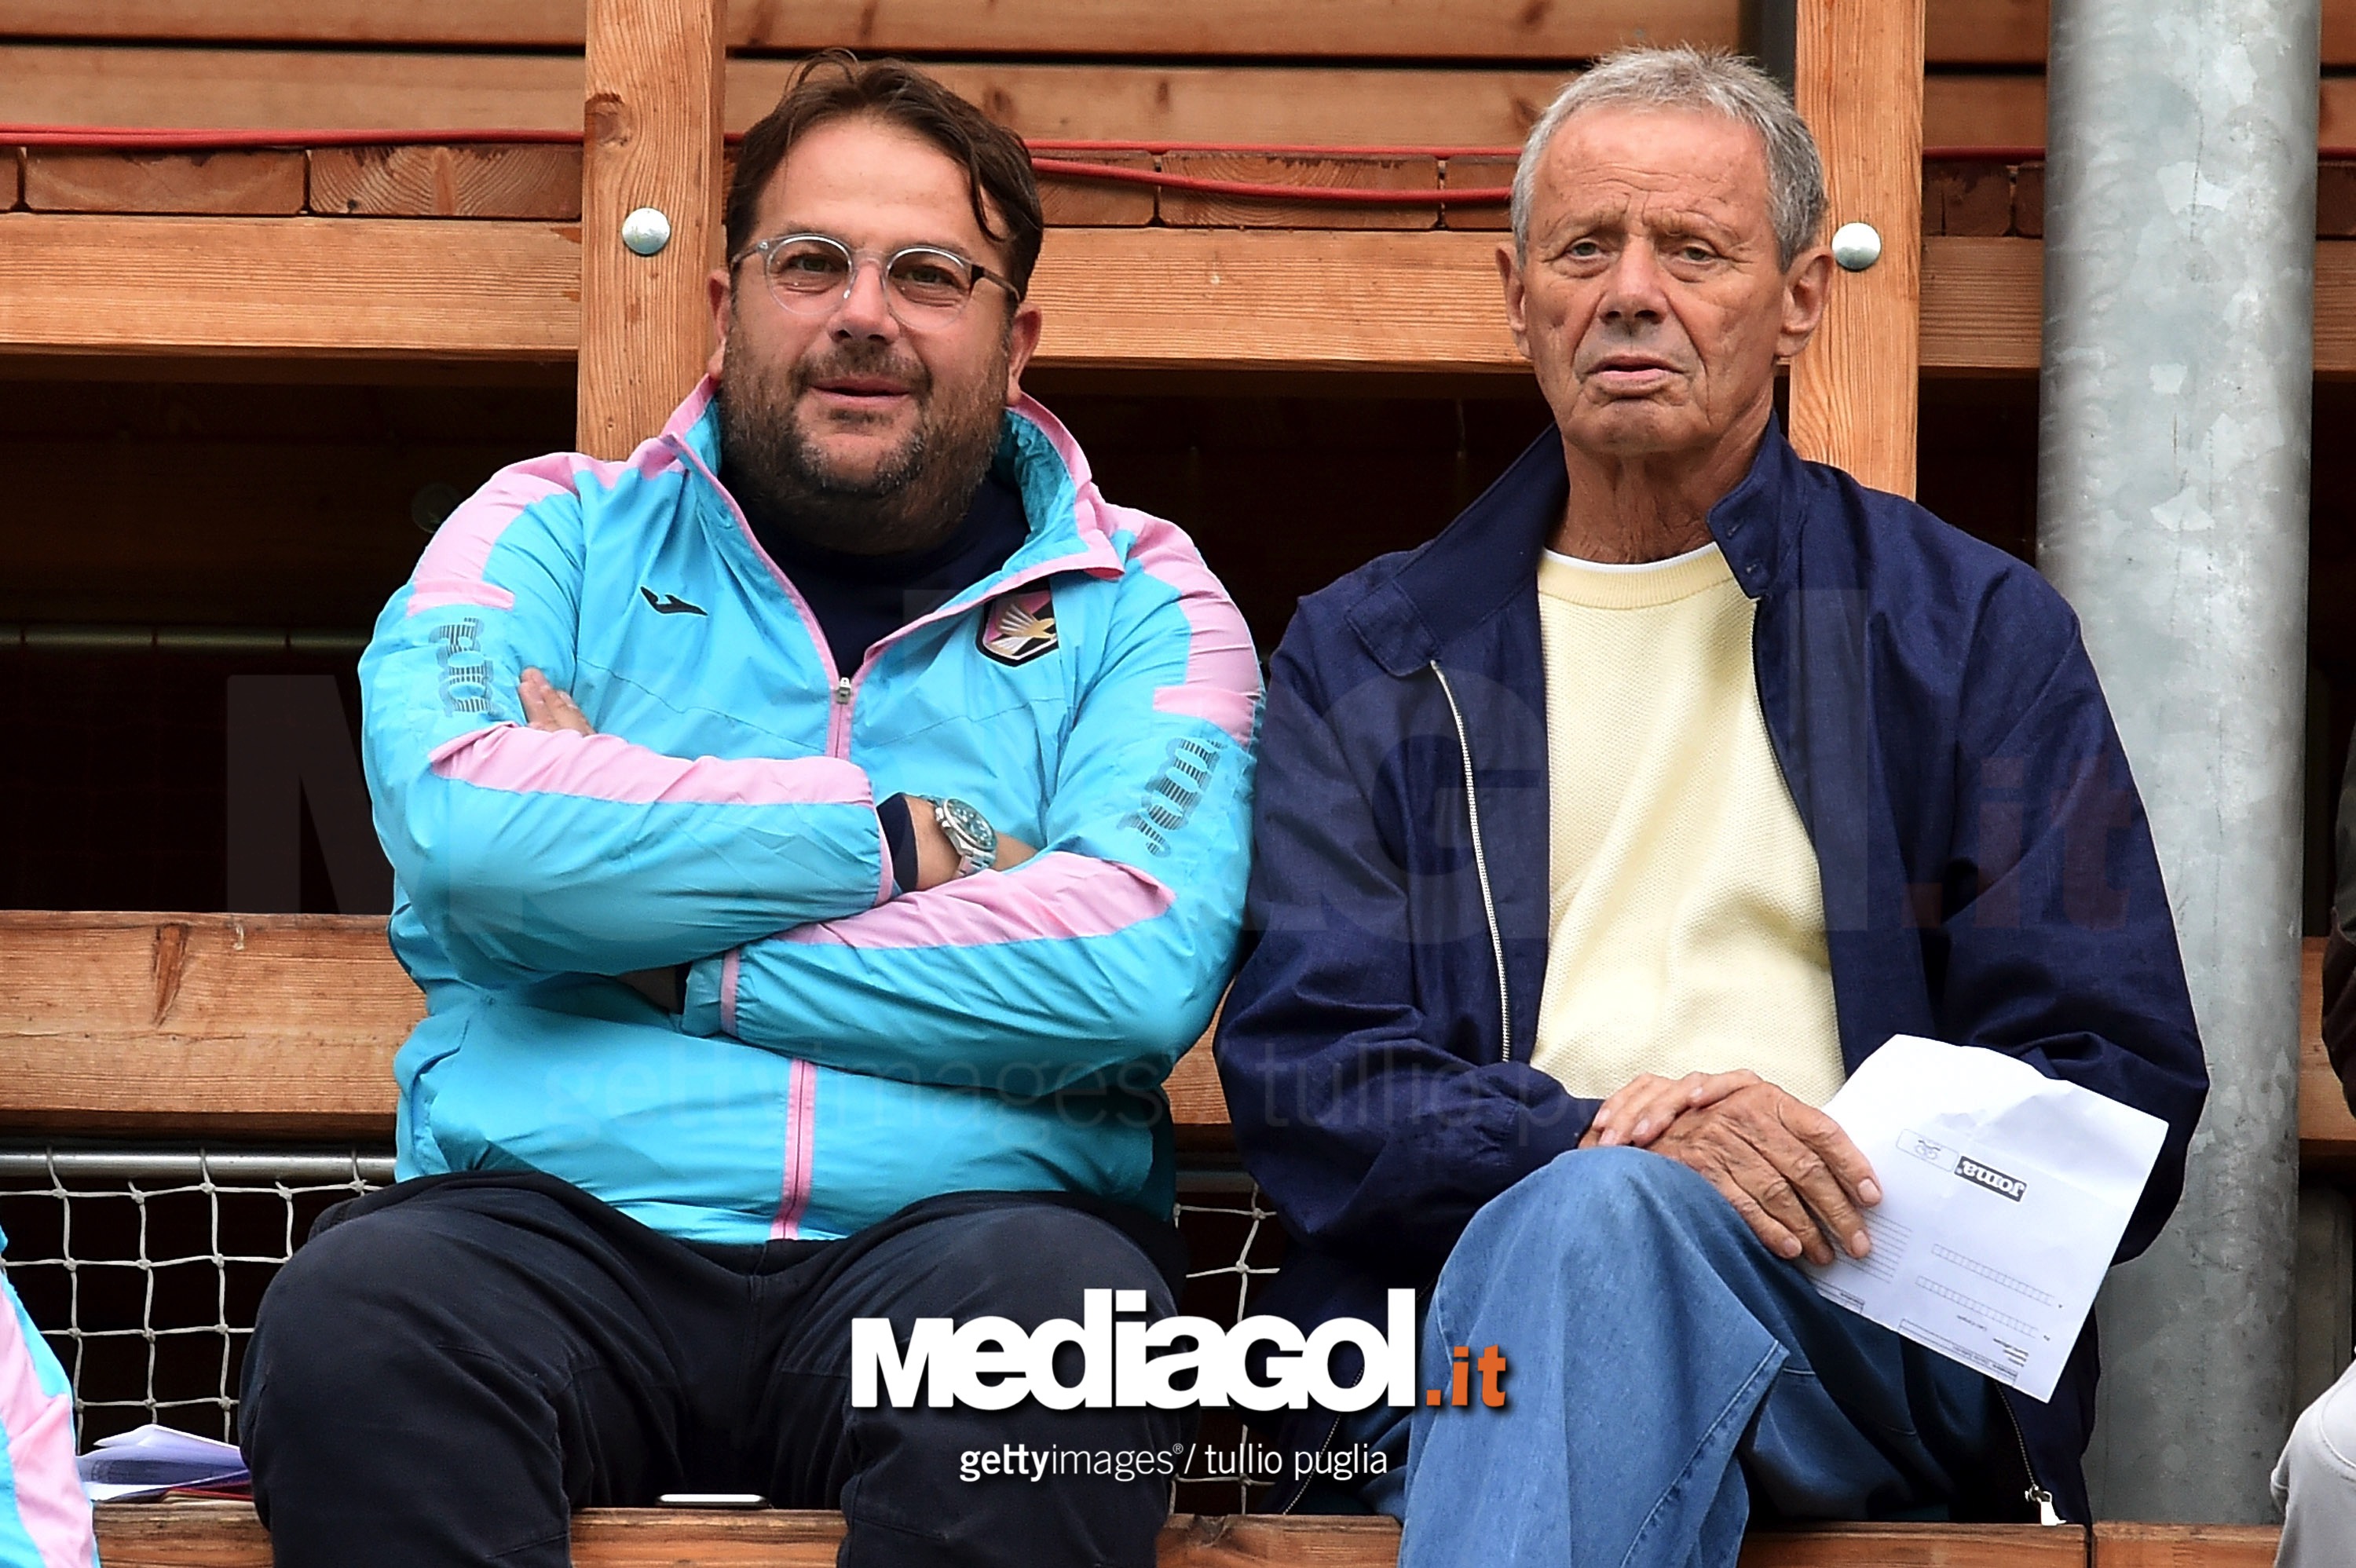 BAD KLEINKIRCHHEIM, AUSTRIA - JULY 27: Sport Manager Daniele Faggiano and President Maurizio Zamparini of Palermo look on during the friendly match between US Citta' di Palermo and Al Wehda at Sportarena on July 27, 2016 in Bad Kleinkirchheim, Austria. (Photo by Tullio M. Puglia/Getty Images)